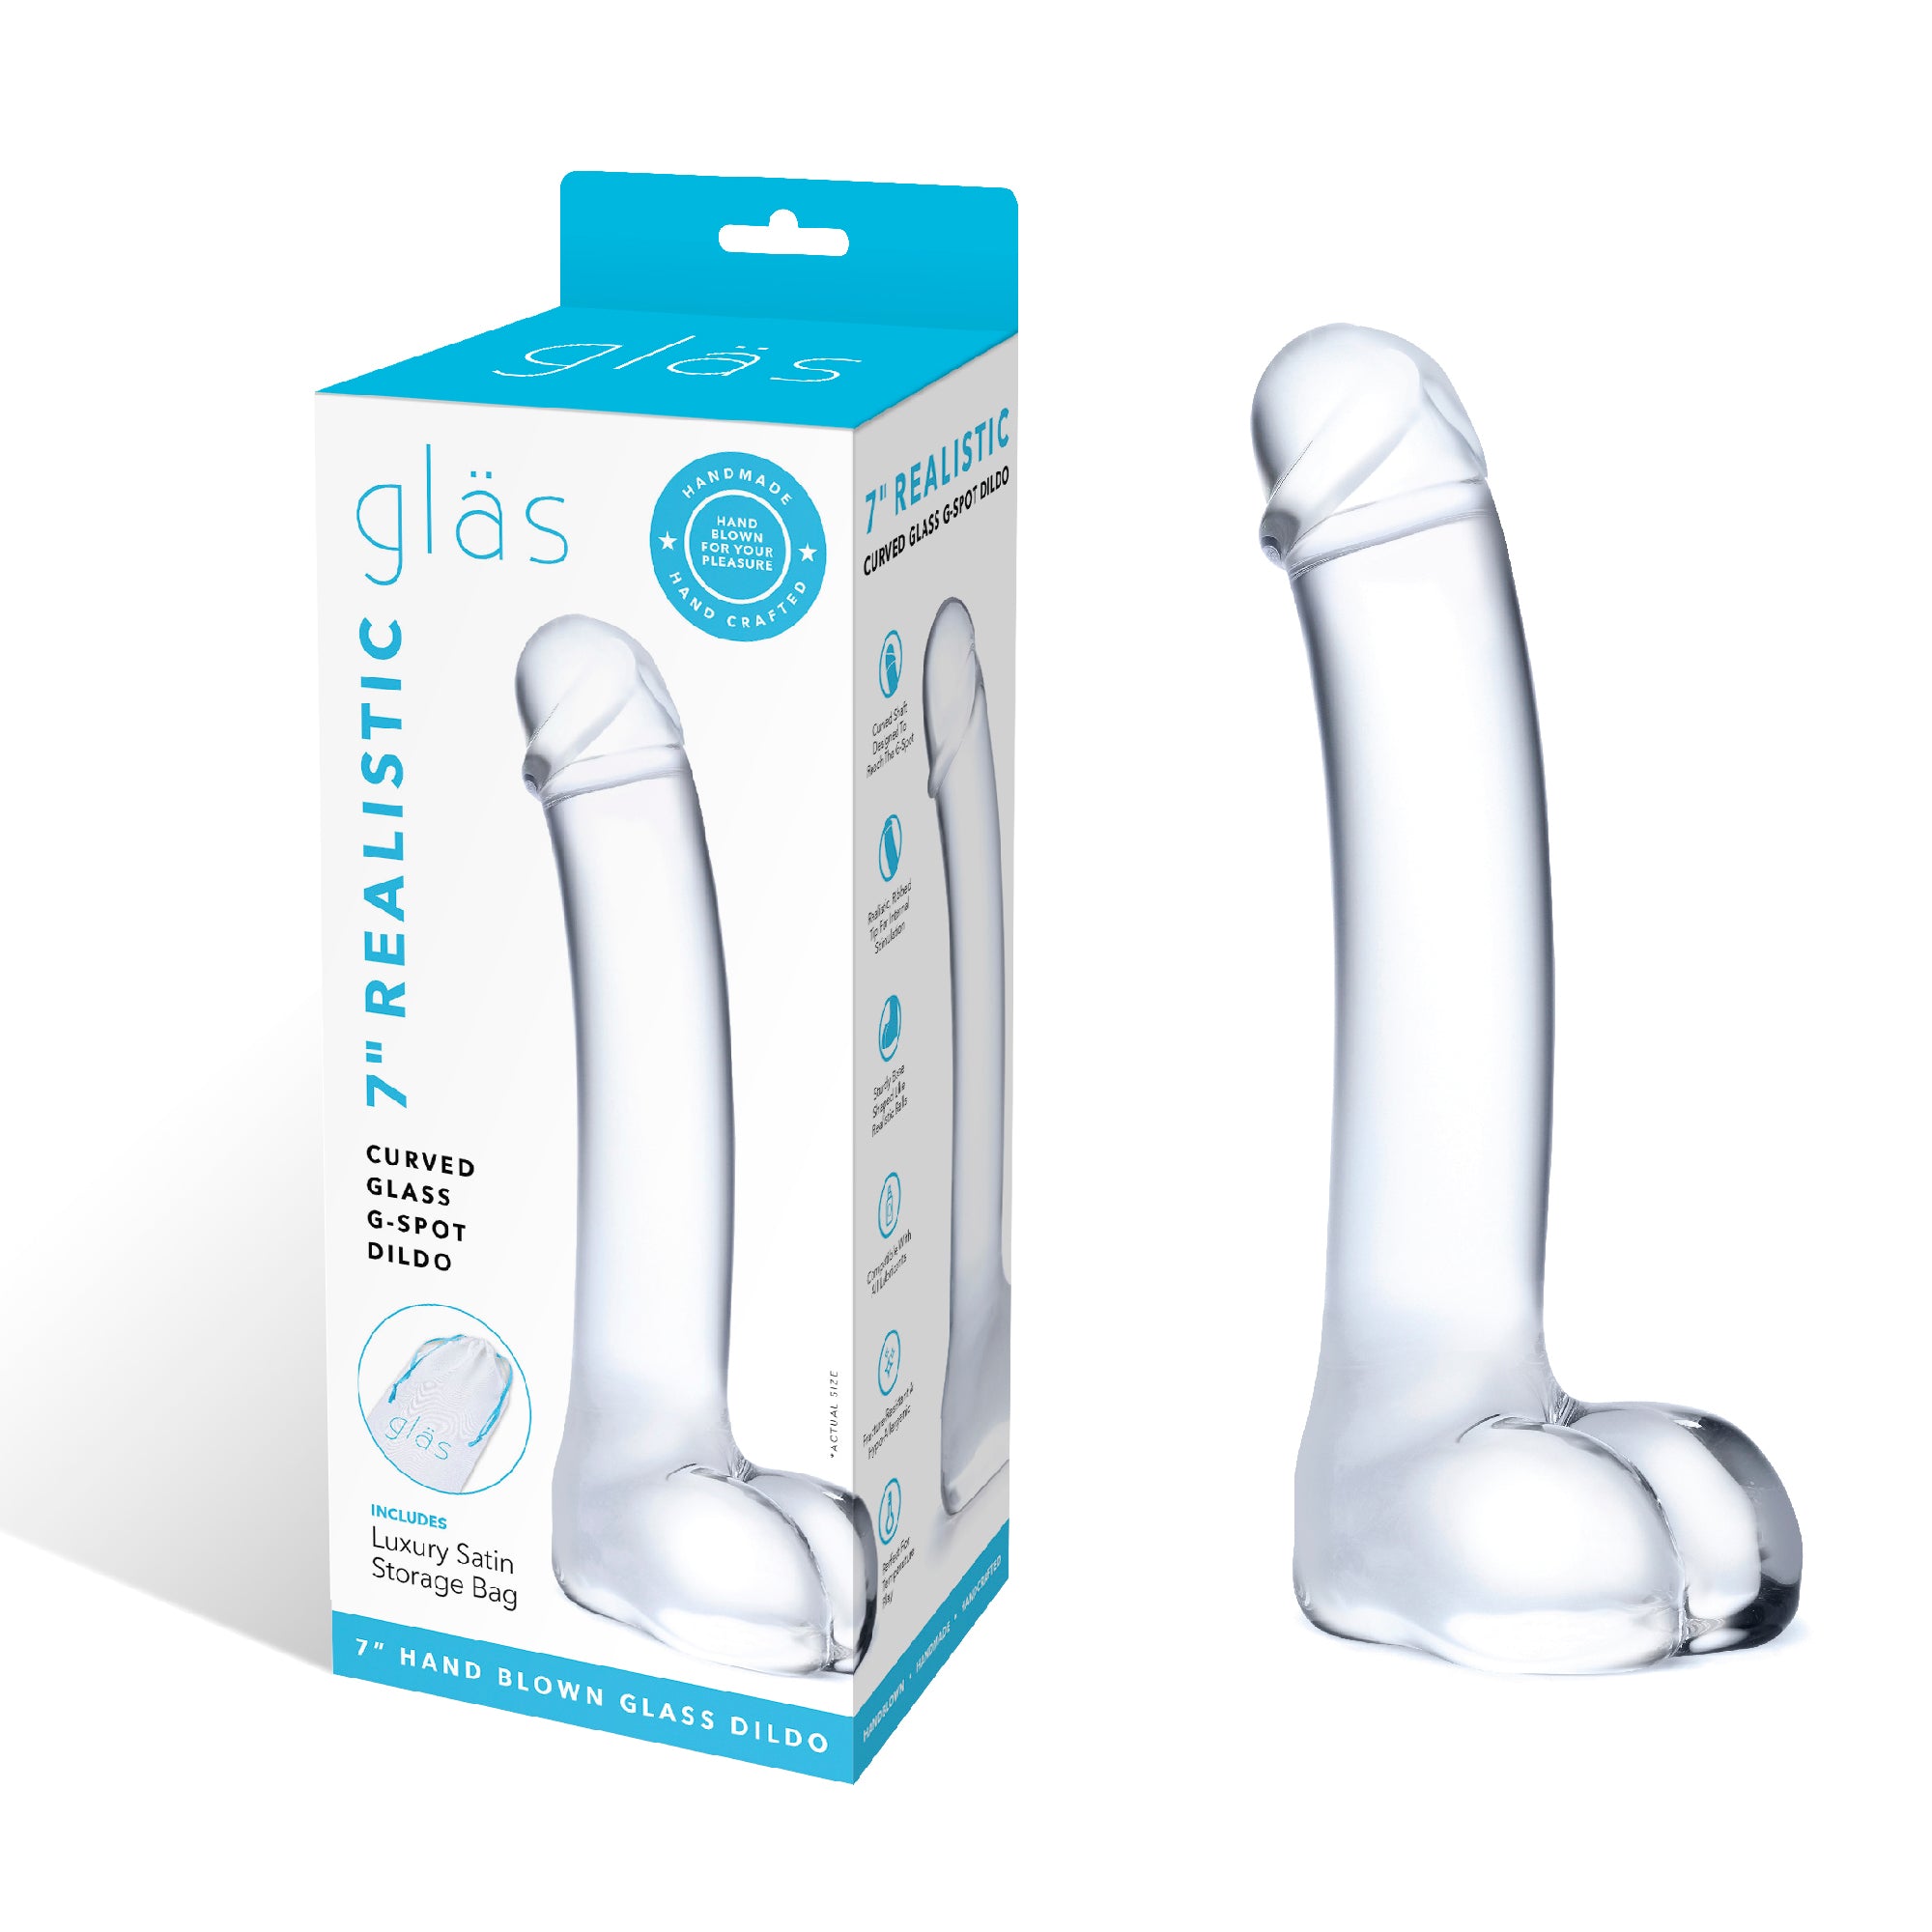 Packaging of the Gläs 7 inch Realistic Curved Glass G-Spot Dildo